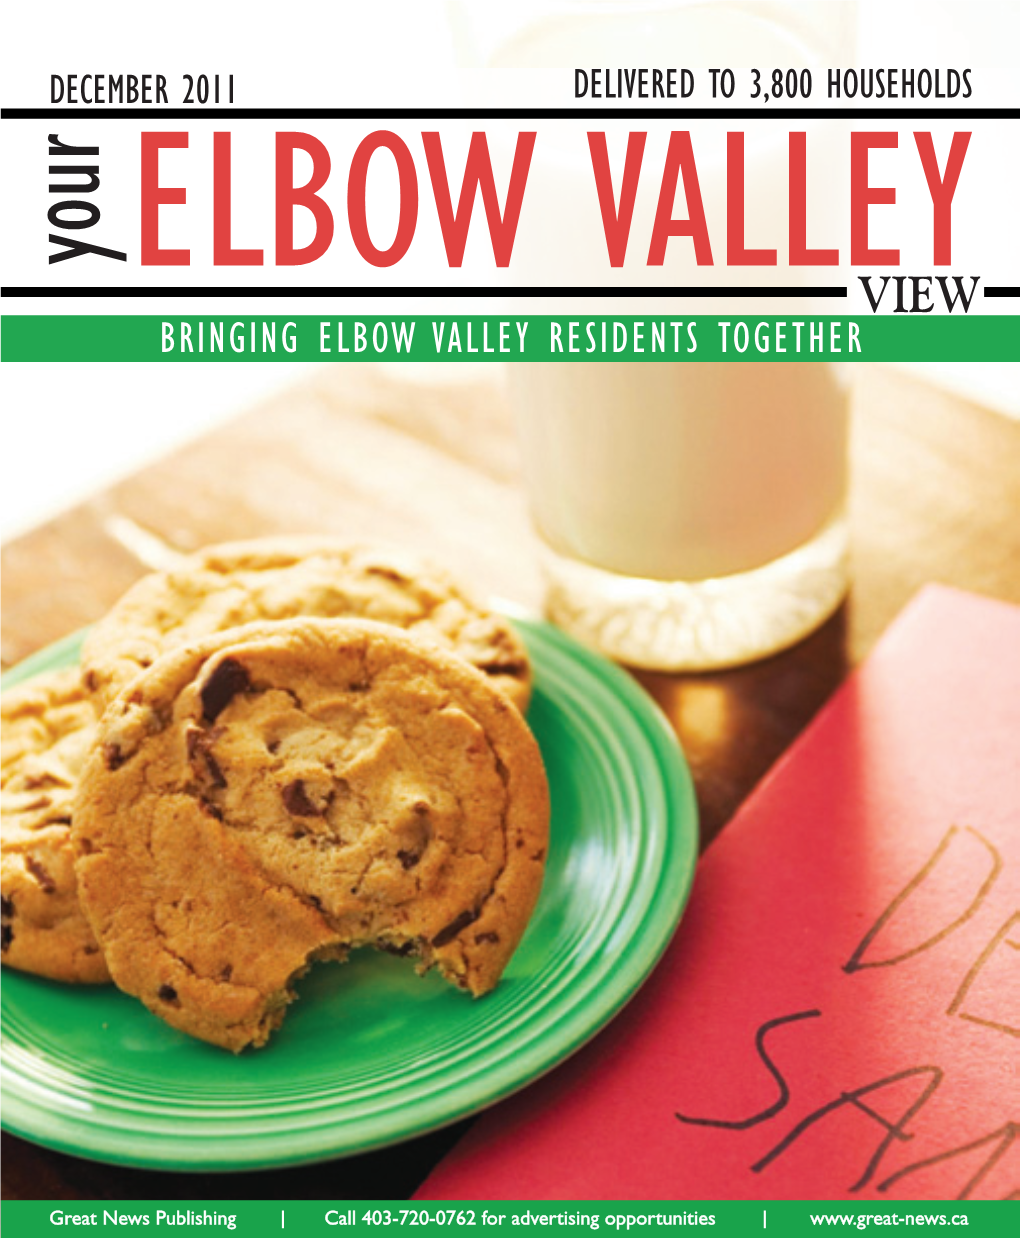 BRINGING ELBOW VALLEY RESIDENTS TOGETHER HOLIDAY GIFT GUIDE Hostess Gifts They’Ll 2011Hide for Themselves 1